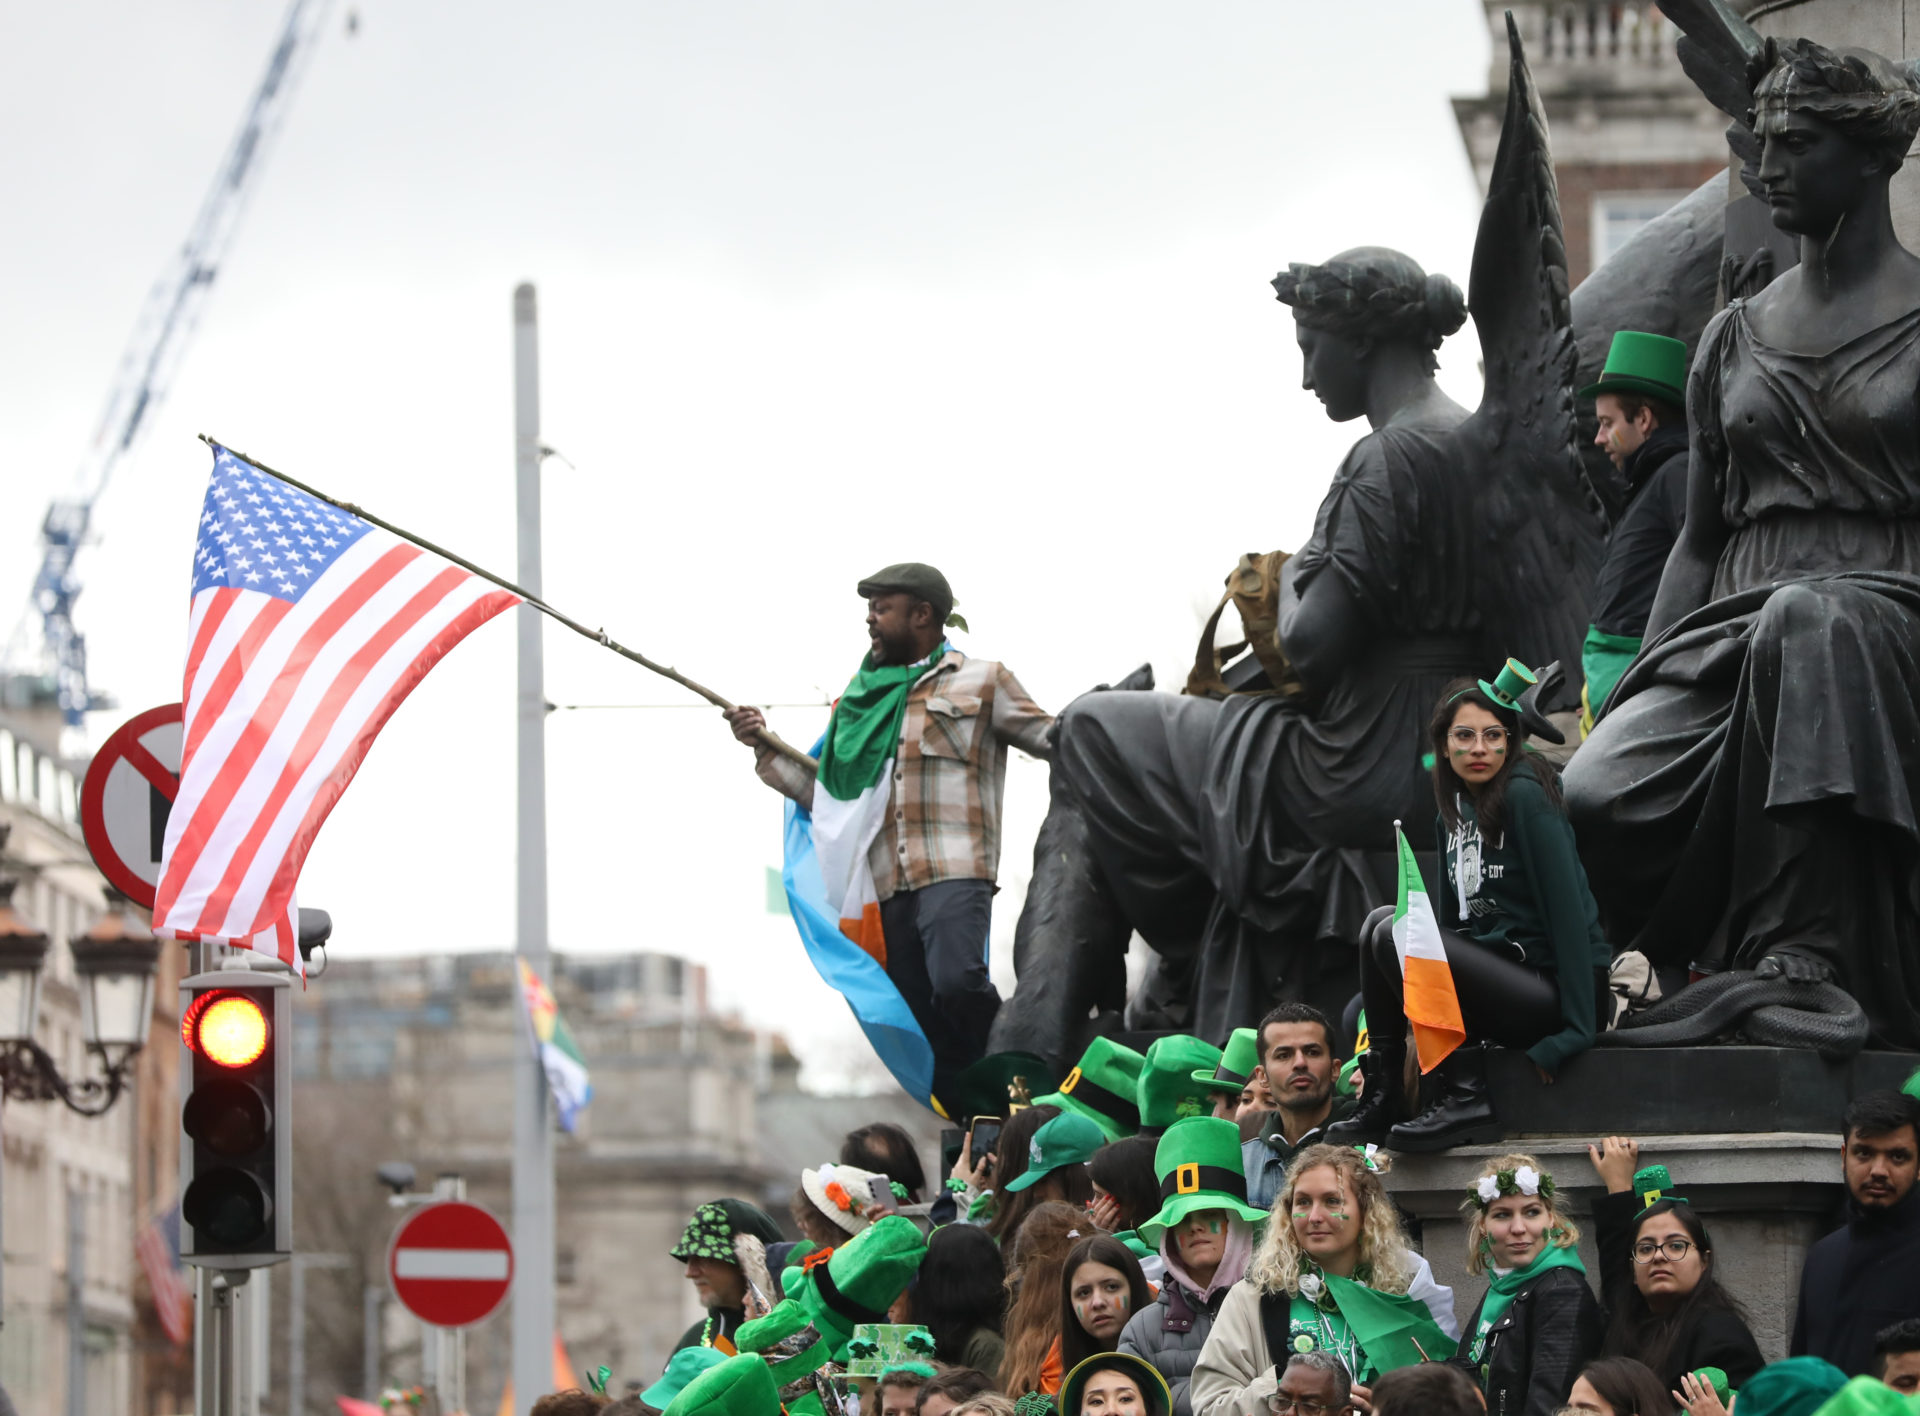 A man waving an American flag on O'Connell Street during the Saint Patrick's Day parade.